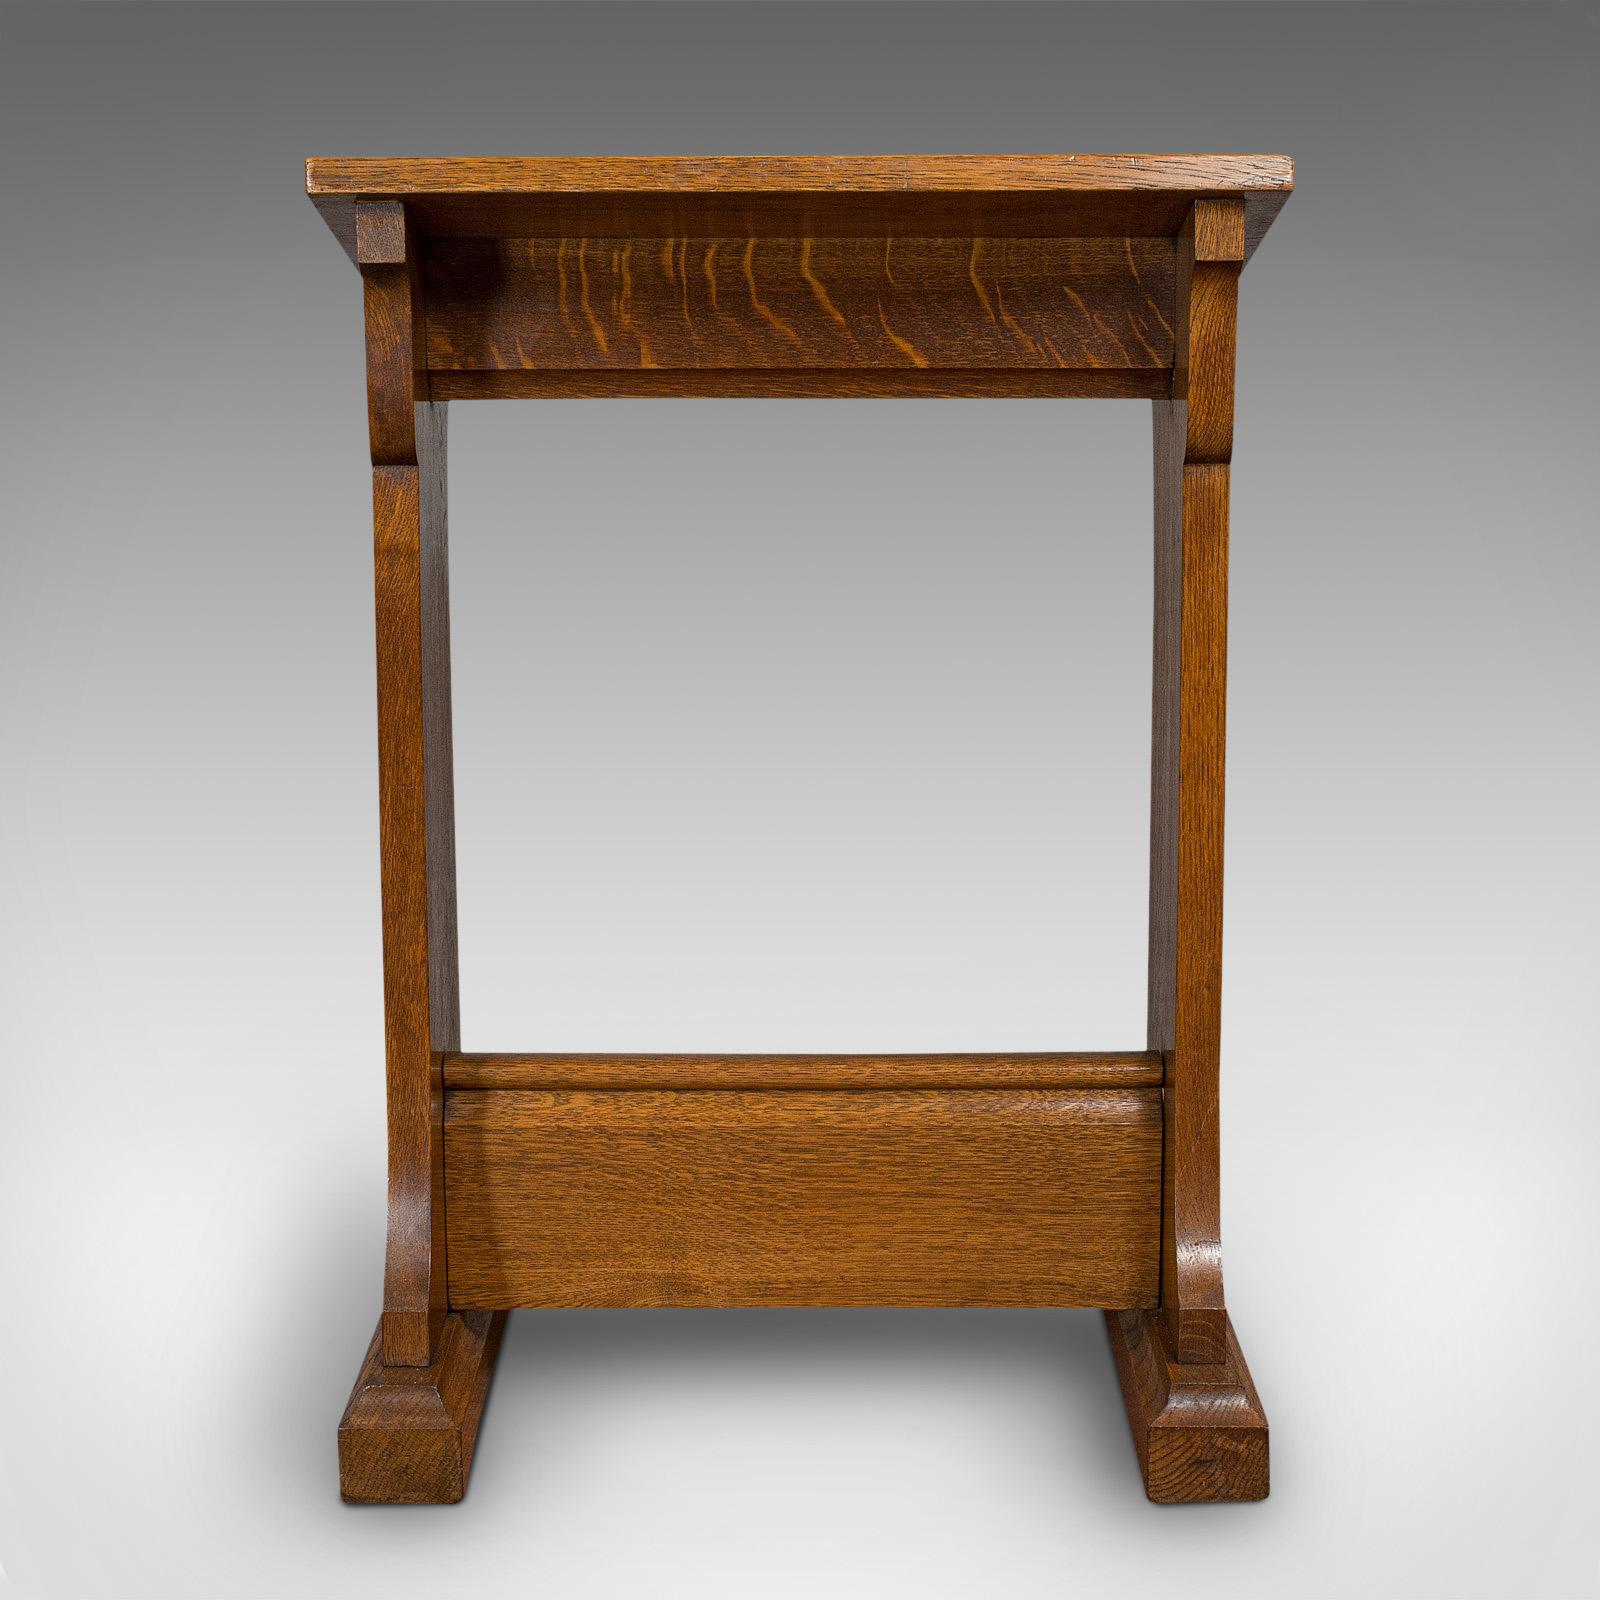 This is an antique lectern. An English, oak ecclesiastical book rest or prie dieu, dating to the late Victorian era, circa 1900.

Attractive rest with superb figuring
Displays a desirable aged patina
Quarter-cut oak resplendent with fine grain